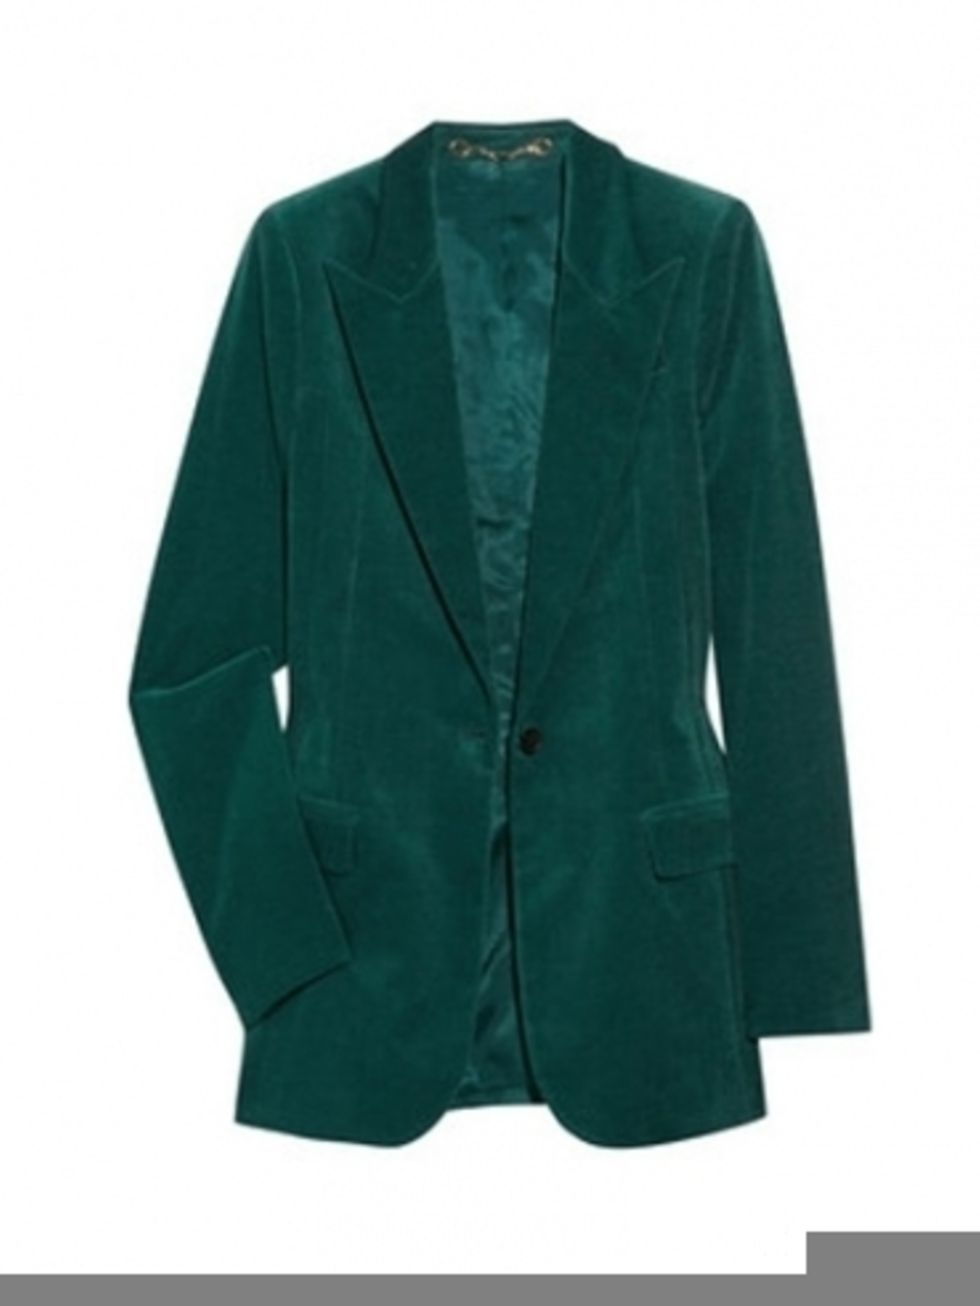 Clothing, Collar, Sleeve, Green, Coat, Textile, Outerwear, Teal, Turquoise, Aqua, 